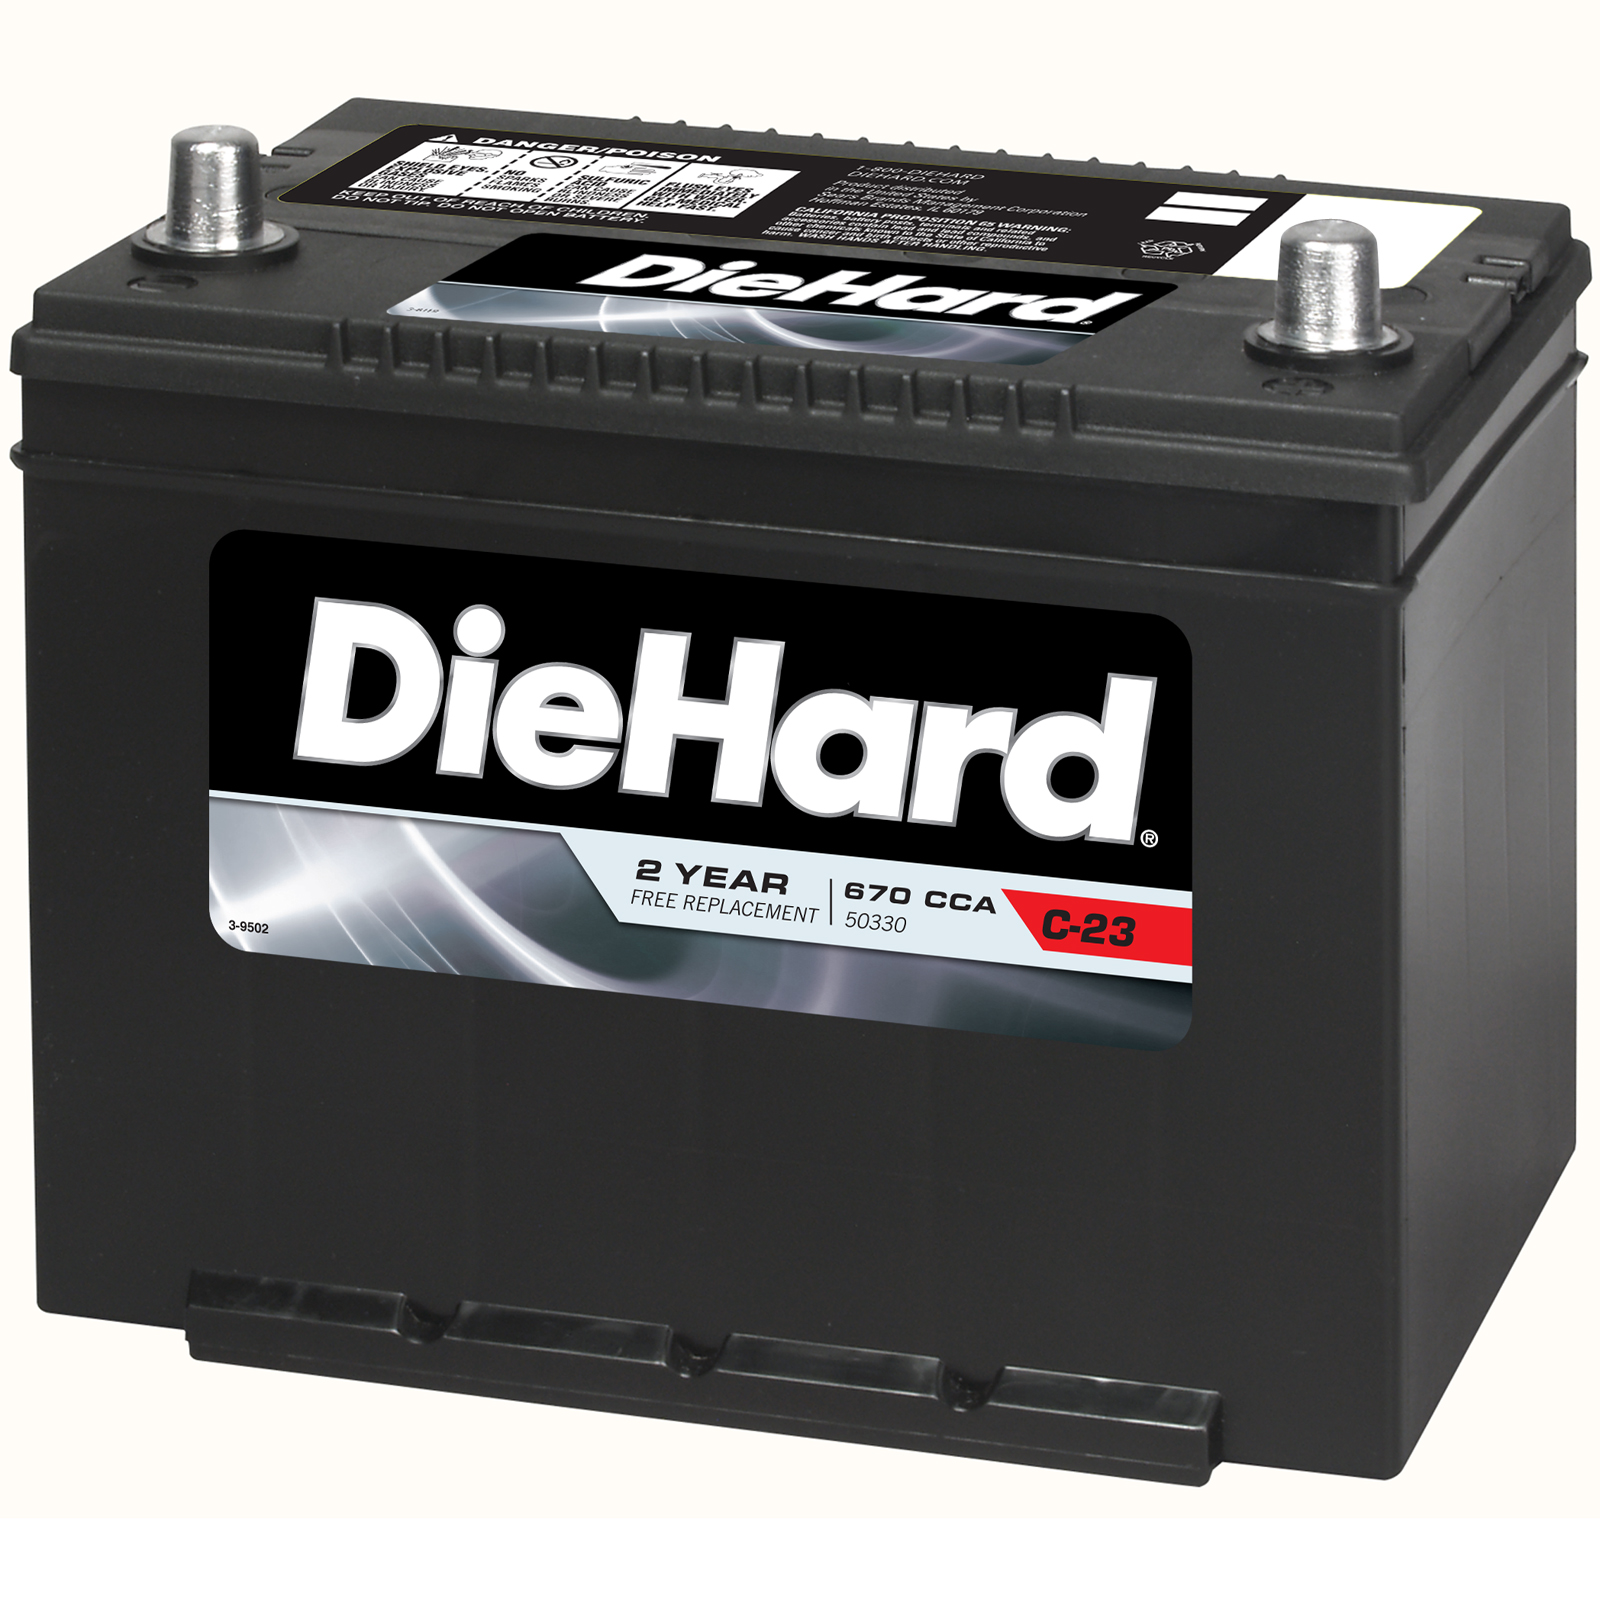 DieHard Automotive Battery - Group Size EP-124R (Price with Exchange)